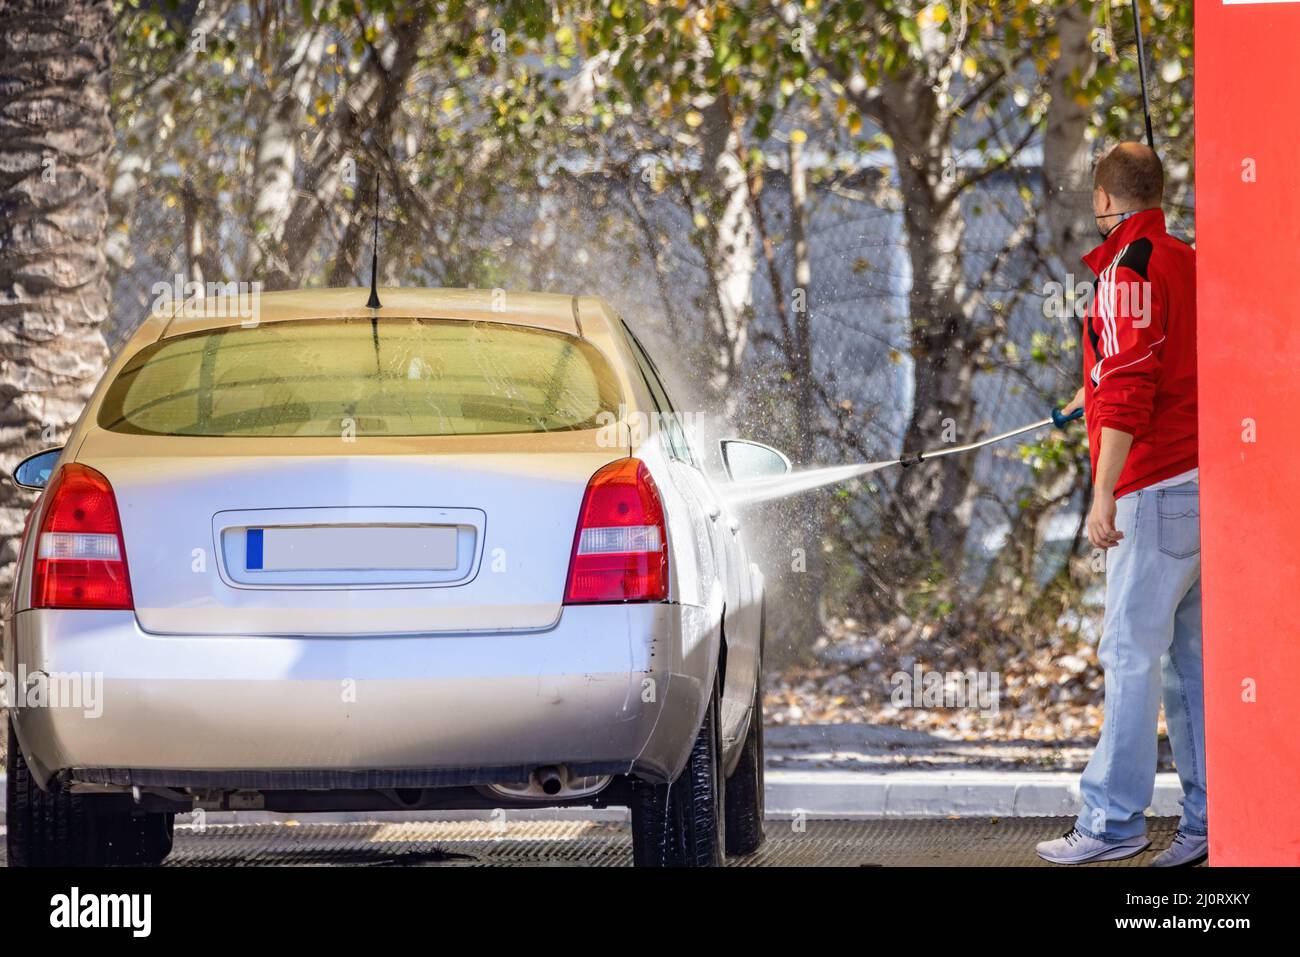 An unidentified man is cleaning his car using a high pressure water at service station Stock Photo